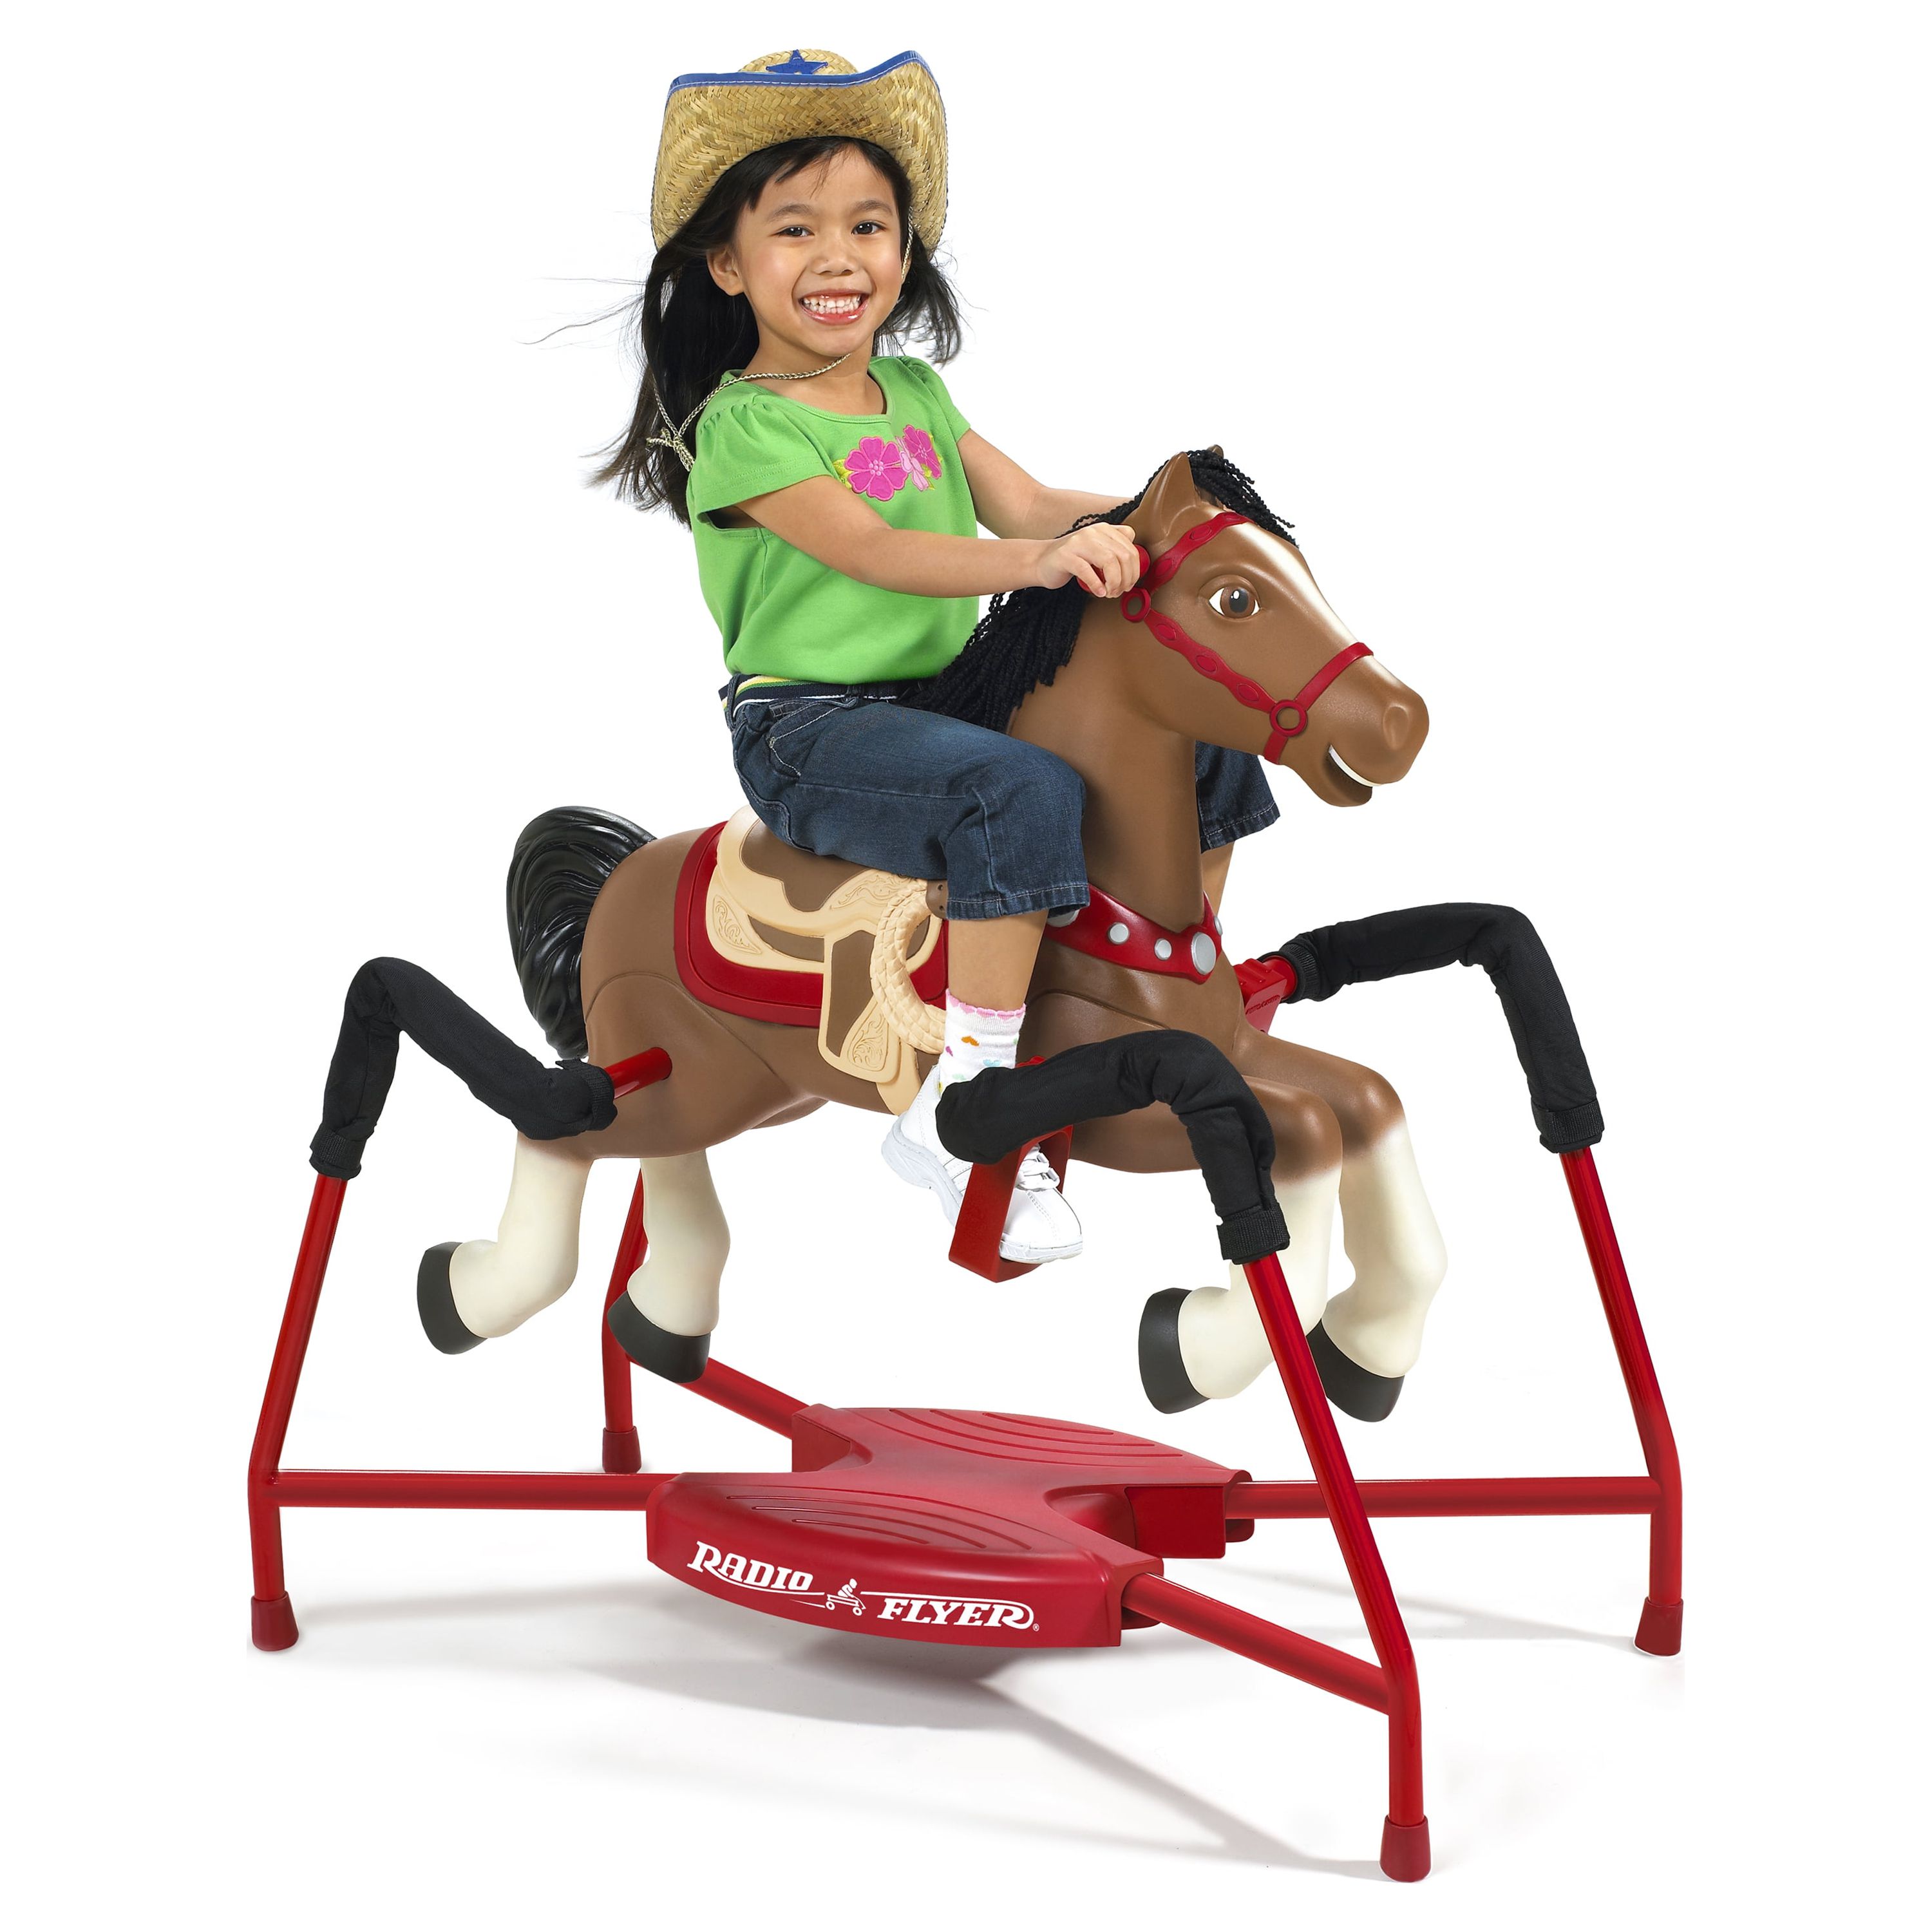 Radio Flyer, Blaze Interactive Spring Horse, Ride-on with Sounds for Boys and Girls - image 2 of 12